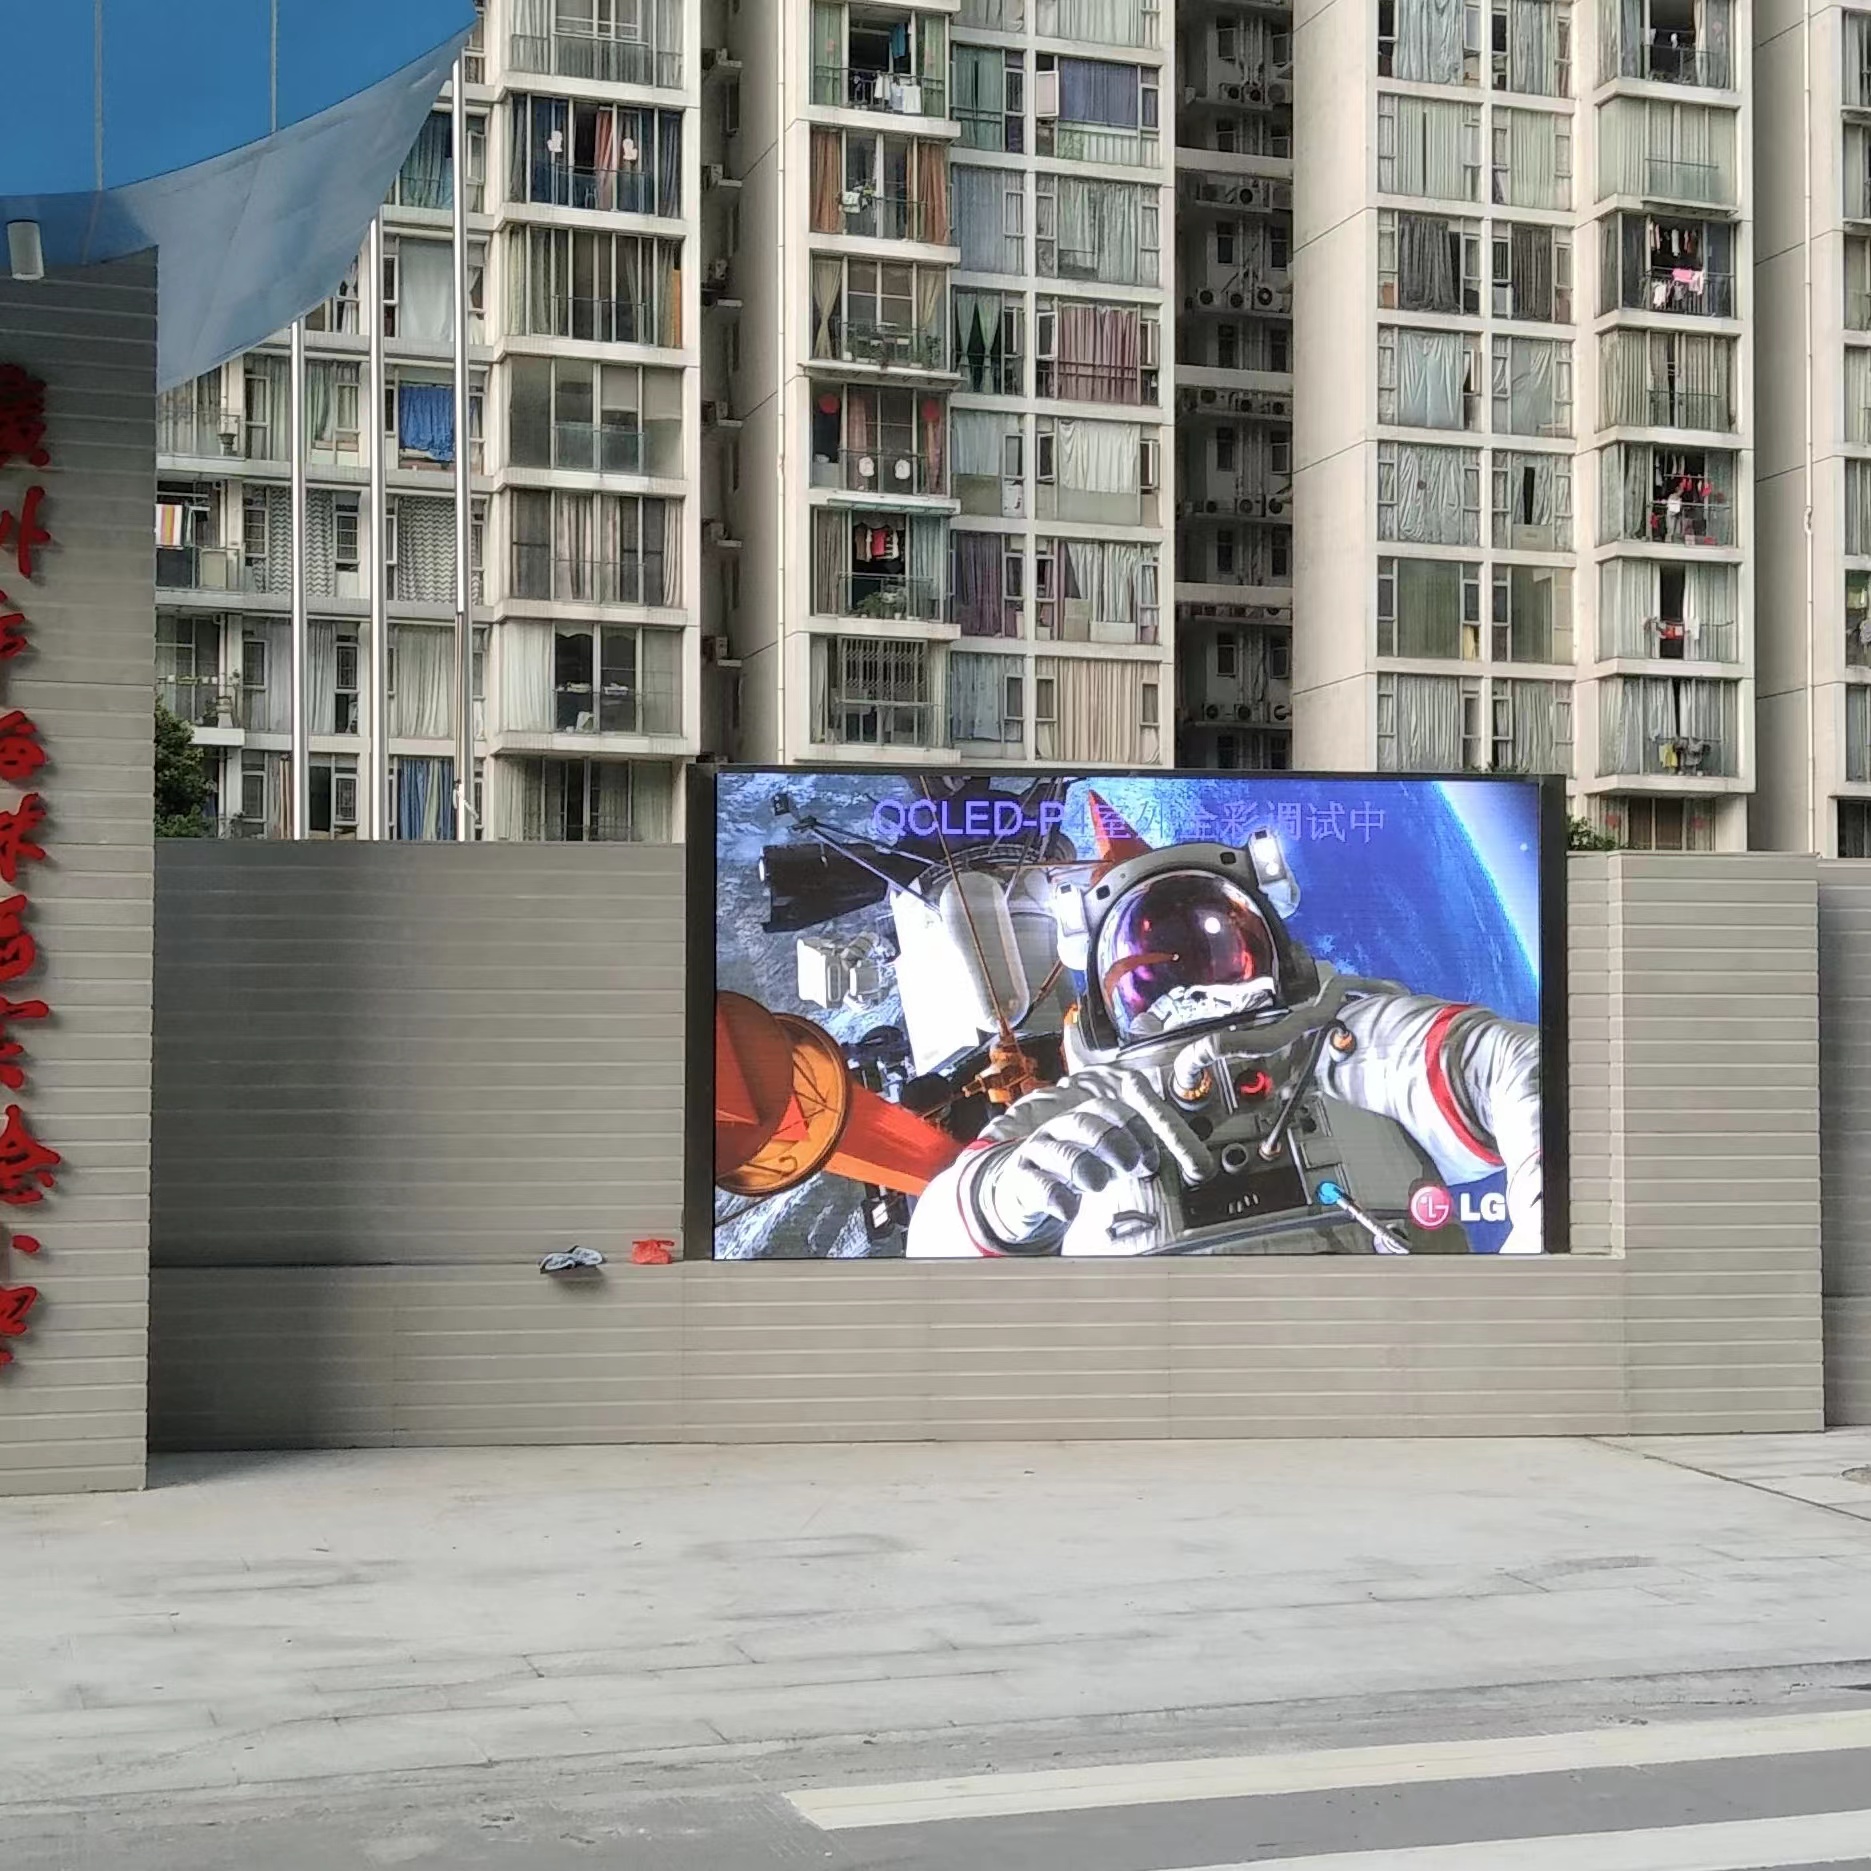 Small Pitch Full Color Fixed Led Display Screen P4 Outdoor Waterproof video wall panel for Commercial Advertsing 